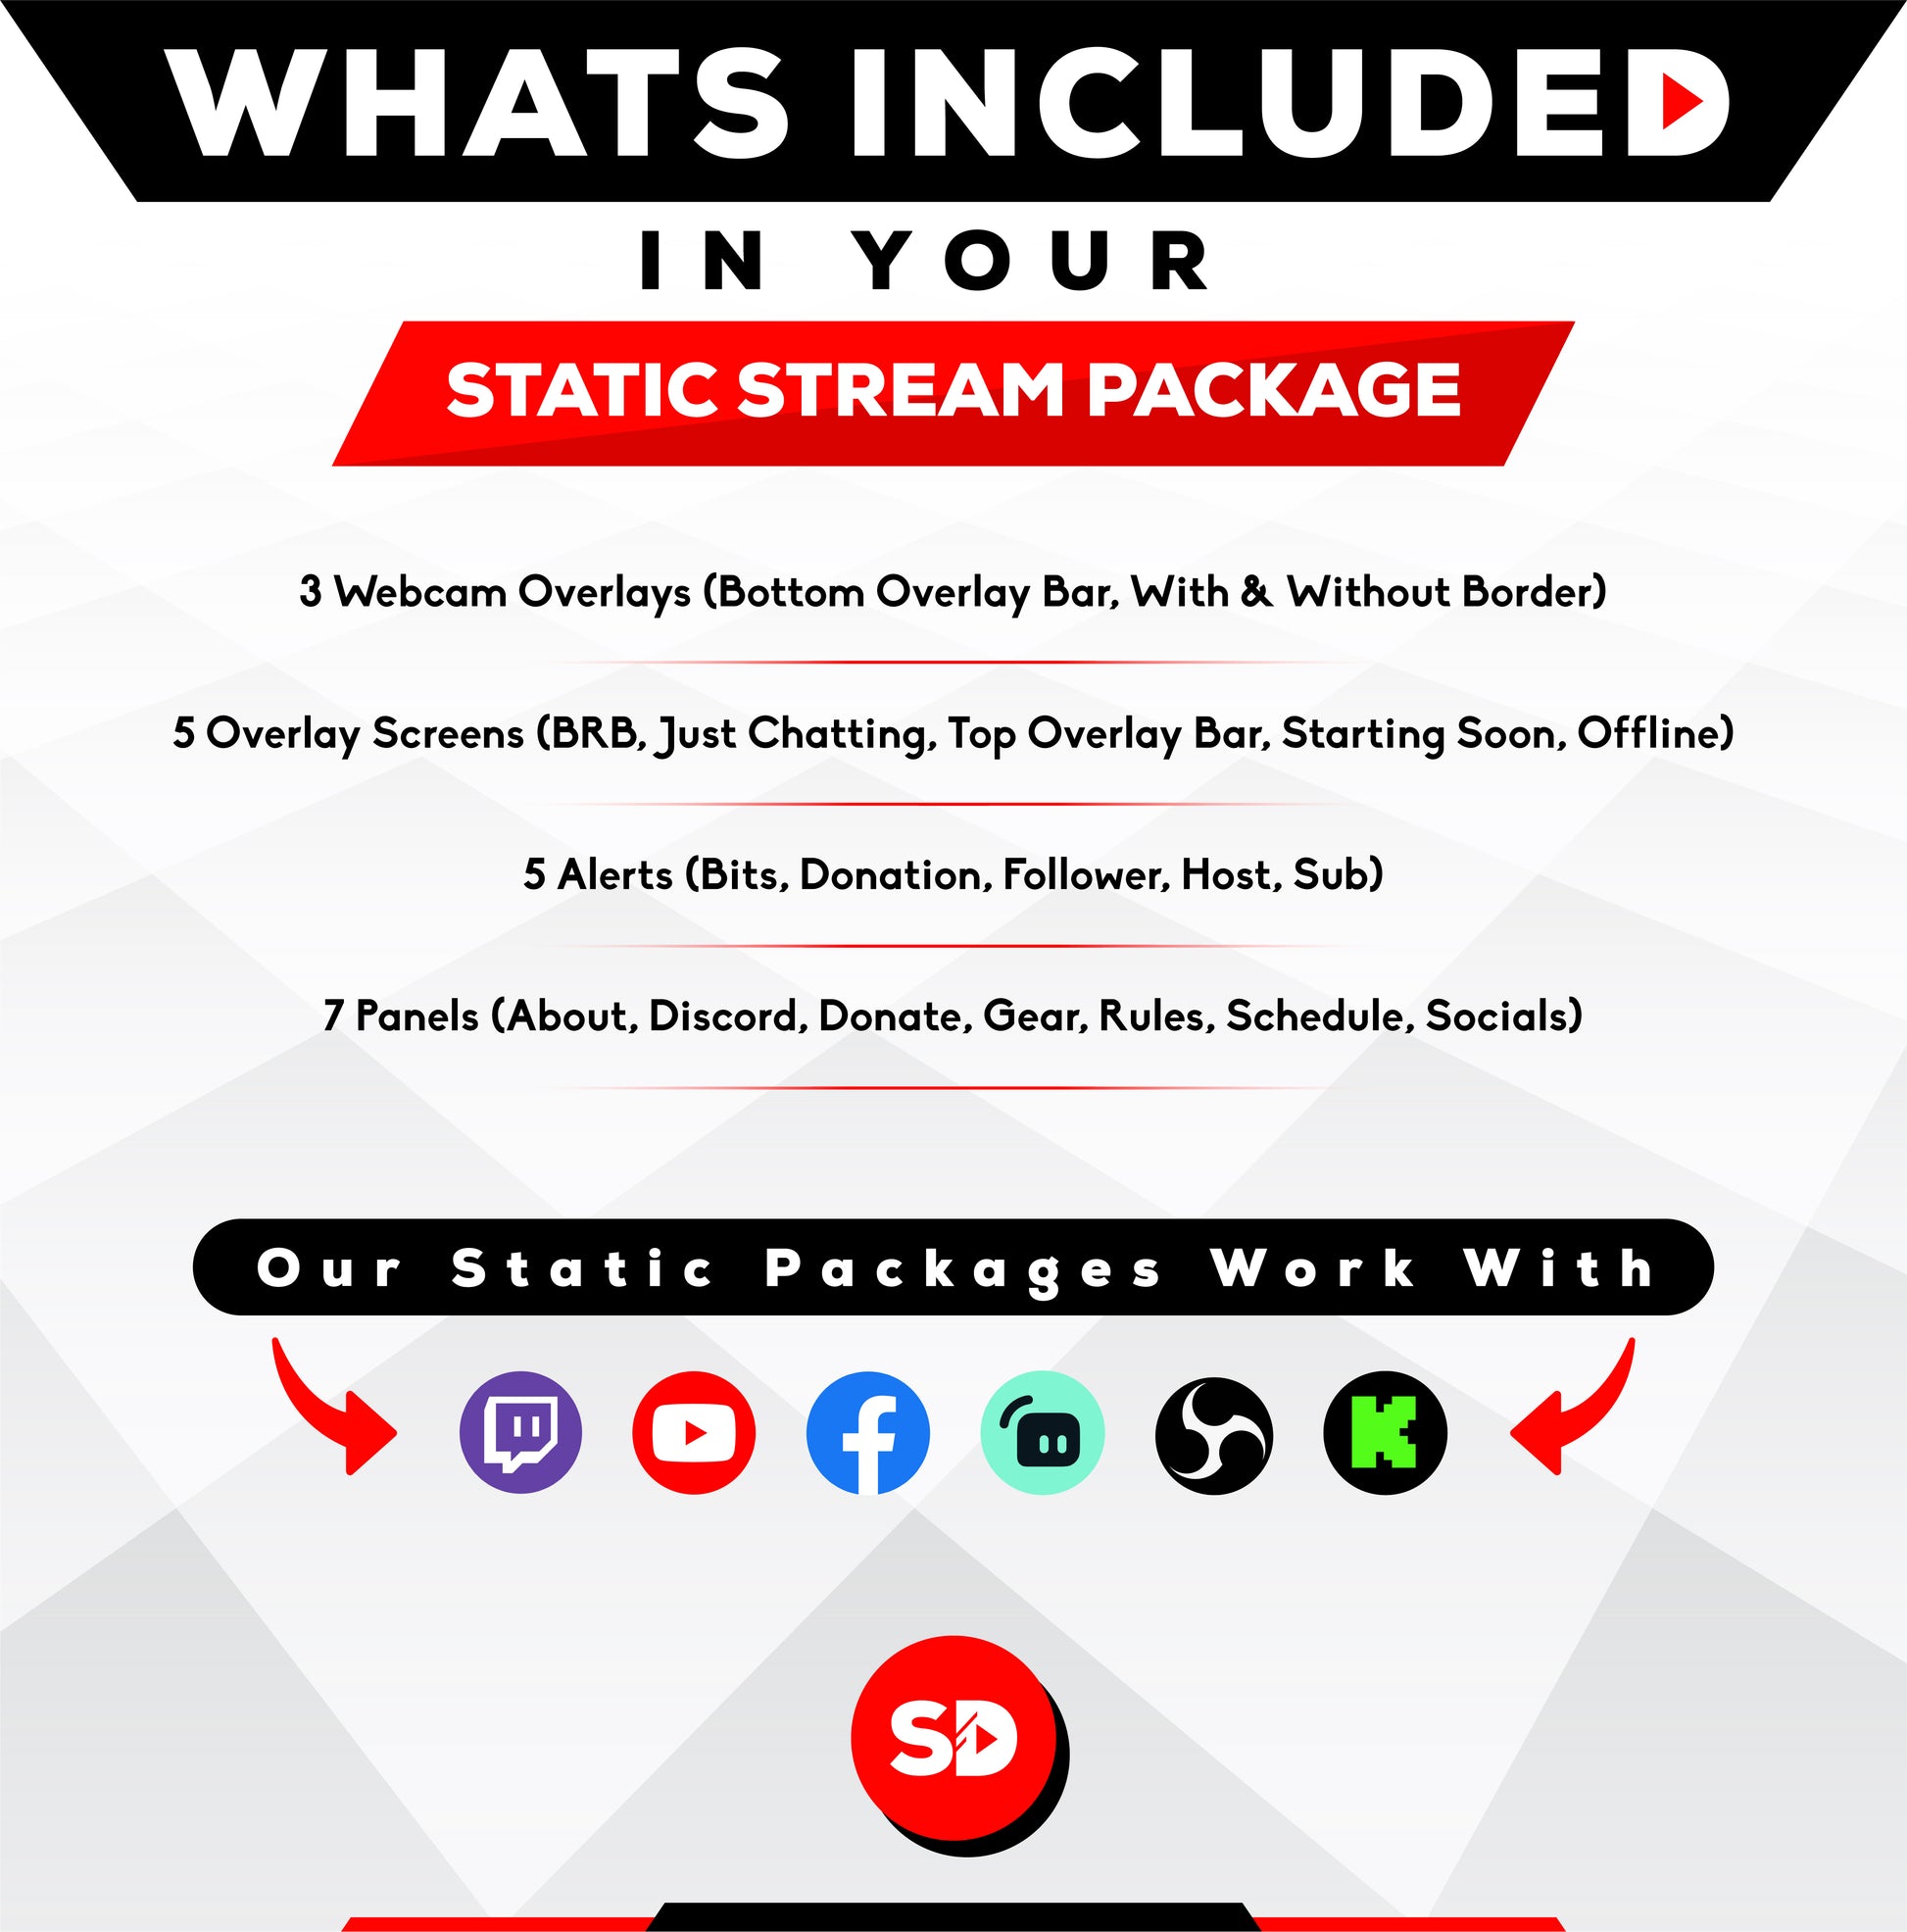 whats included in your package - static stream overlay package - monochrome - stream designz